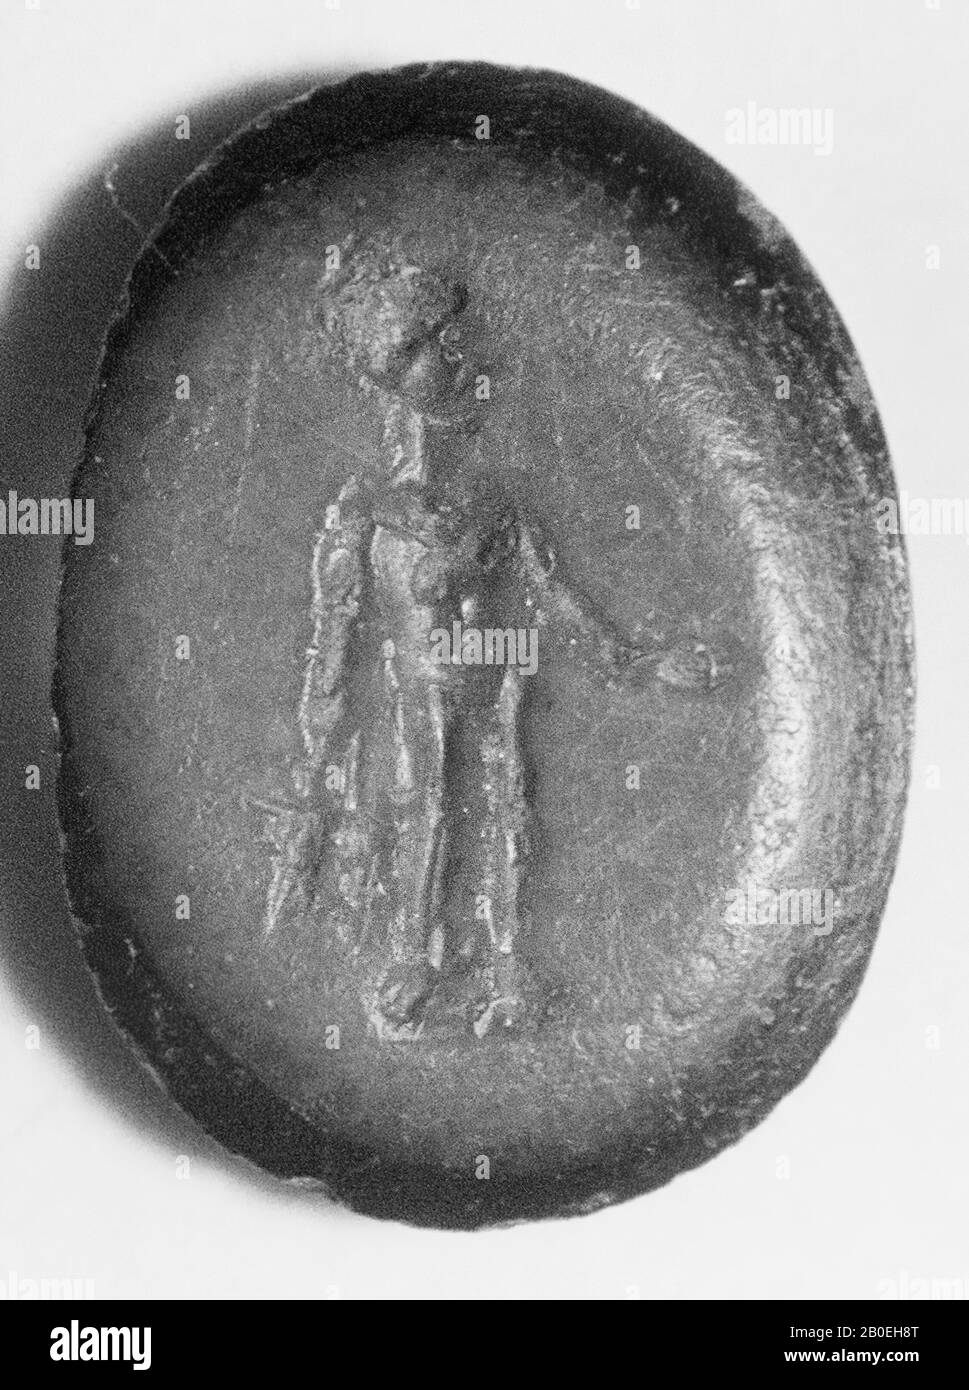 standing deity Bonus Eventus with two ears of corn in the right hand and offering dish in the left hand., Gem, intaglio, ringstone, stone, onyx, Color: black and blue, opaque, Shape: oval, standing, Machined: Maaskant-Kleibrink , M., Catalog of the engraved gems in the Royal Coin Cabinet, 1978, p.60, fig.2, type F4, 9.5 x 7 mm. Thickness 1,5 mm., 1st - 3rd century after Chr. 1-300, Netherlands, Limburg, unknown, unknown Stock Photo